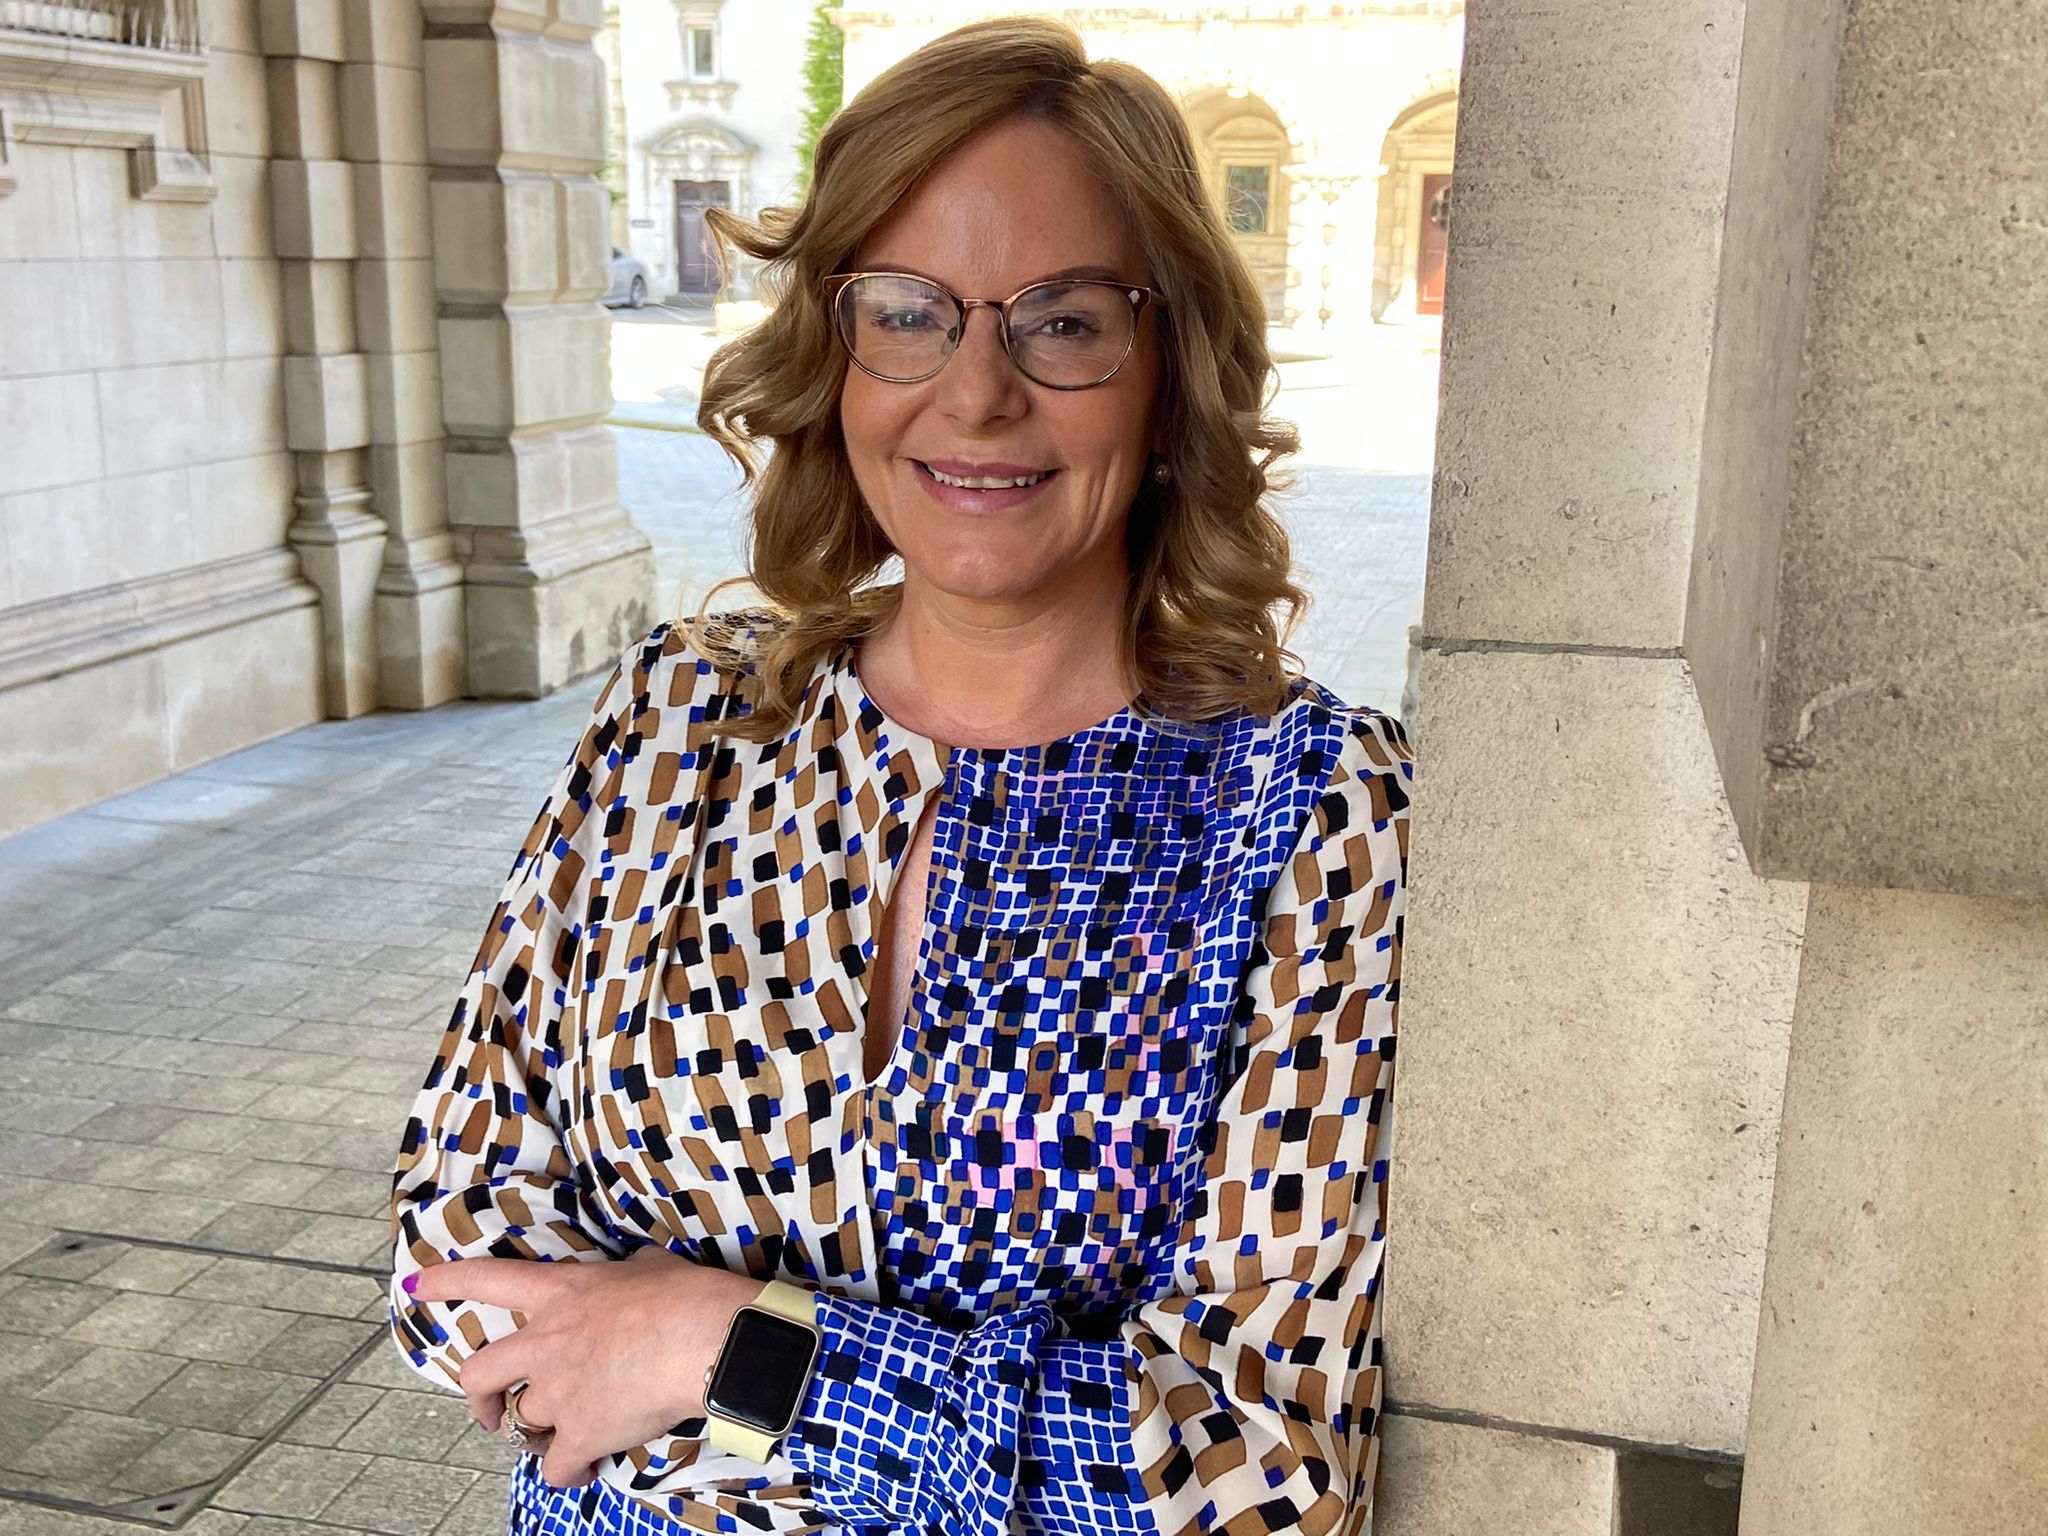 CHAIN OF OFFICE: Grosvenor Road councillor Tina Black has been selected as the new Lord Mayor of Belfast